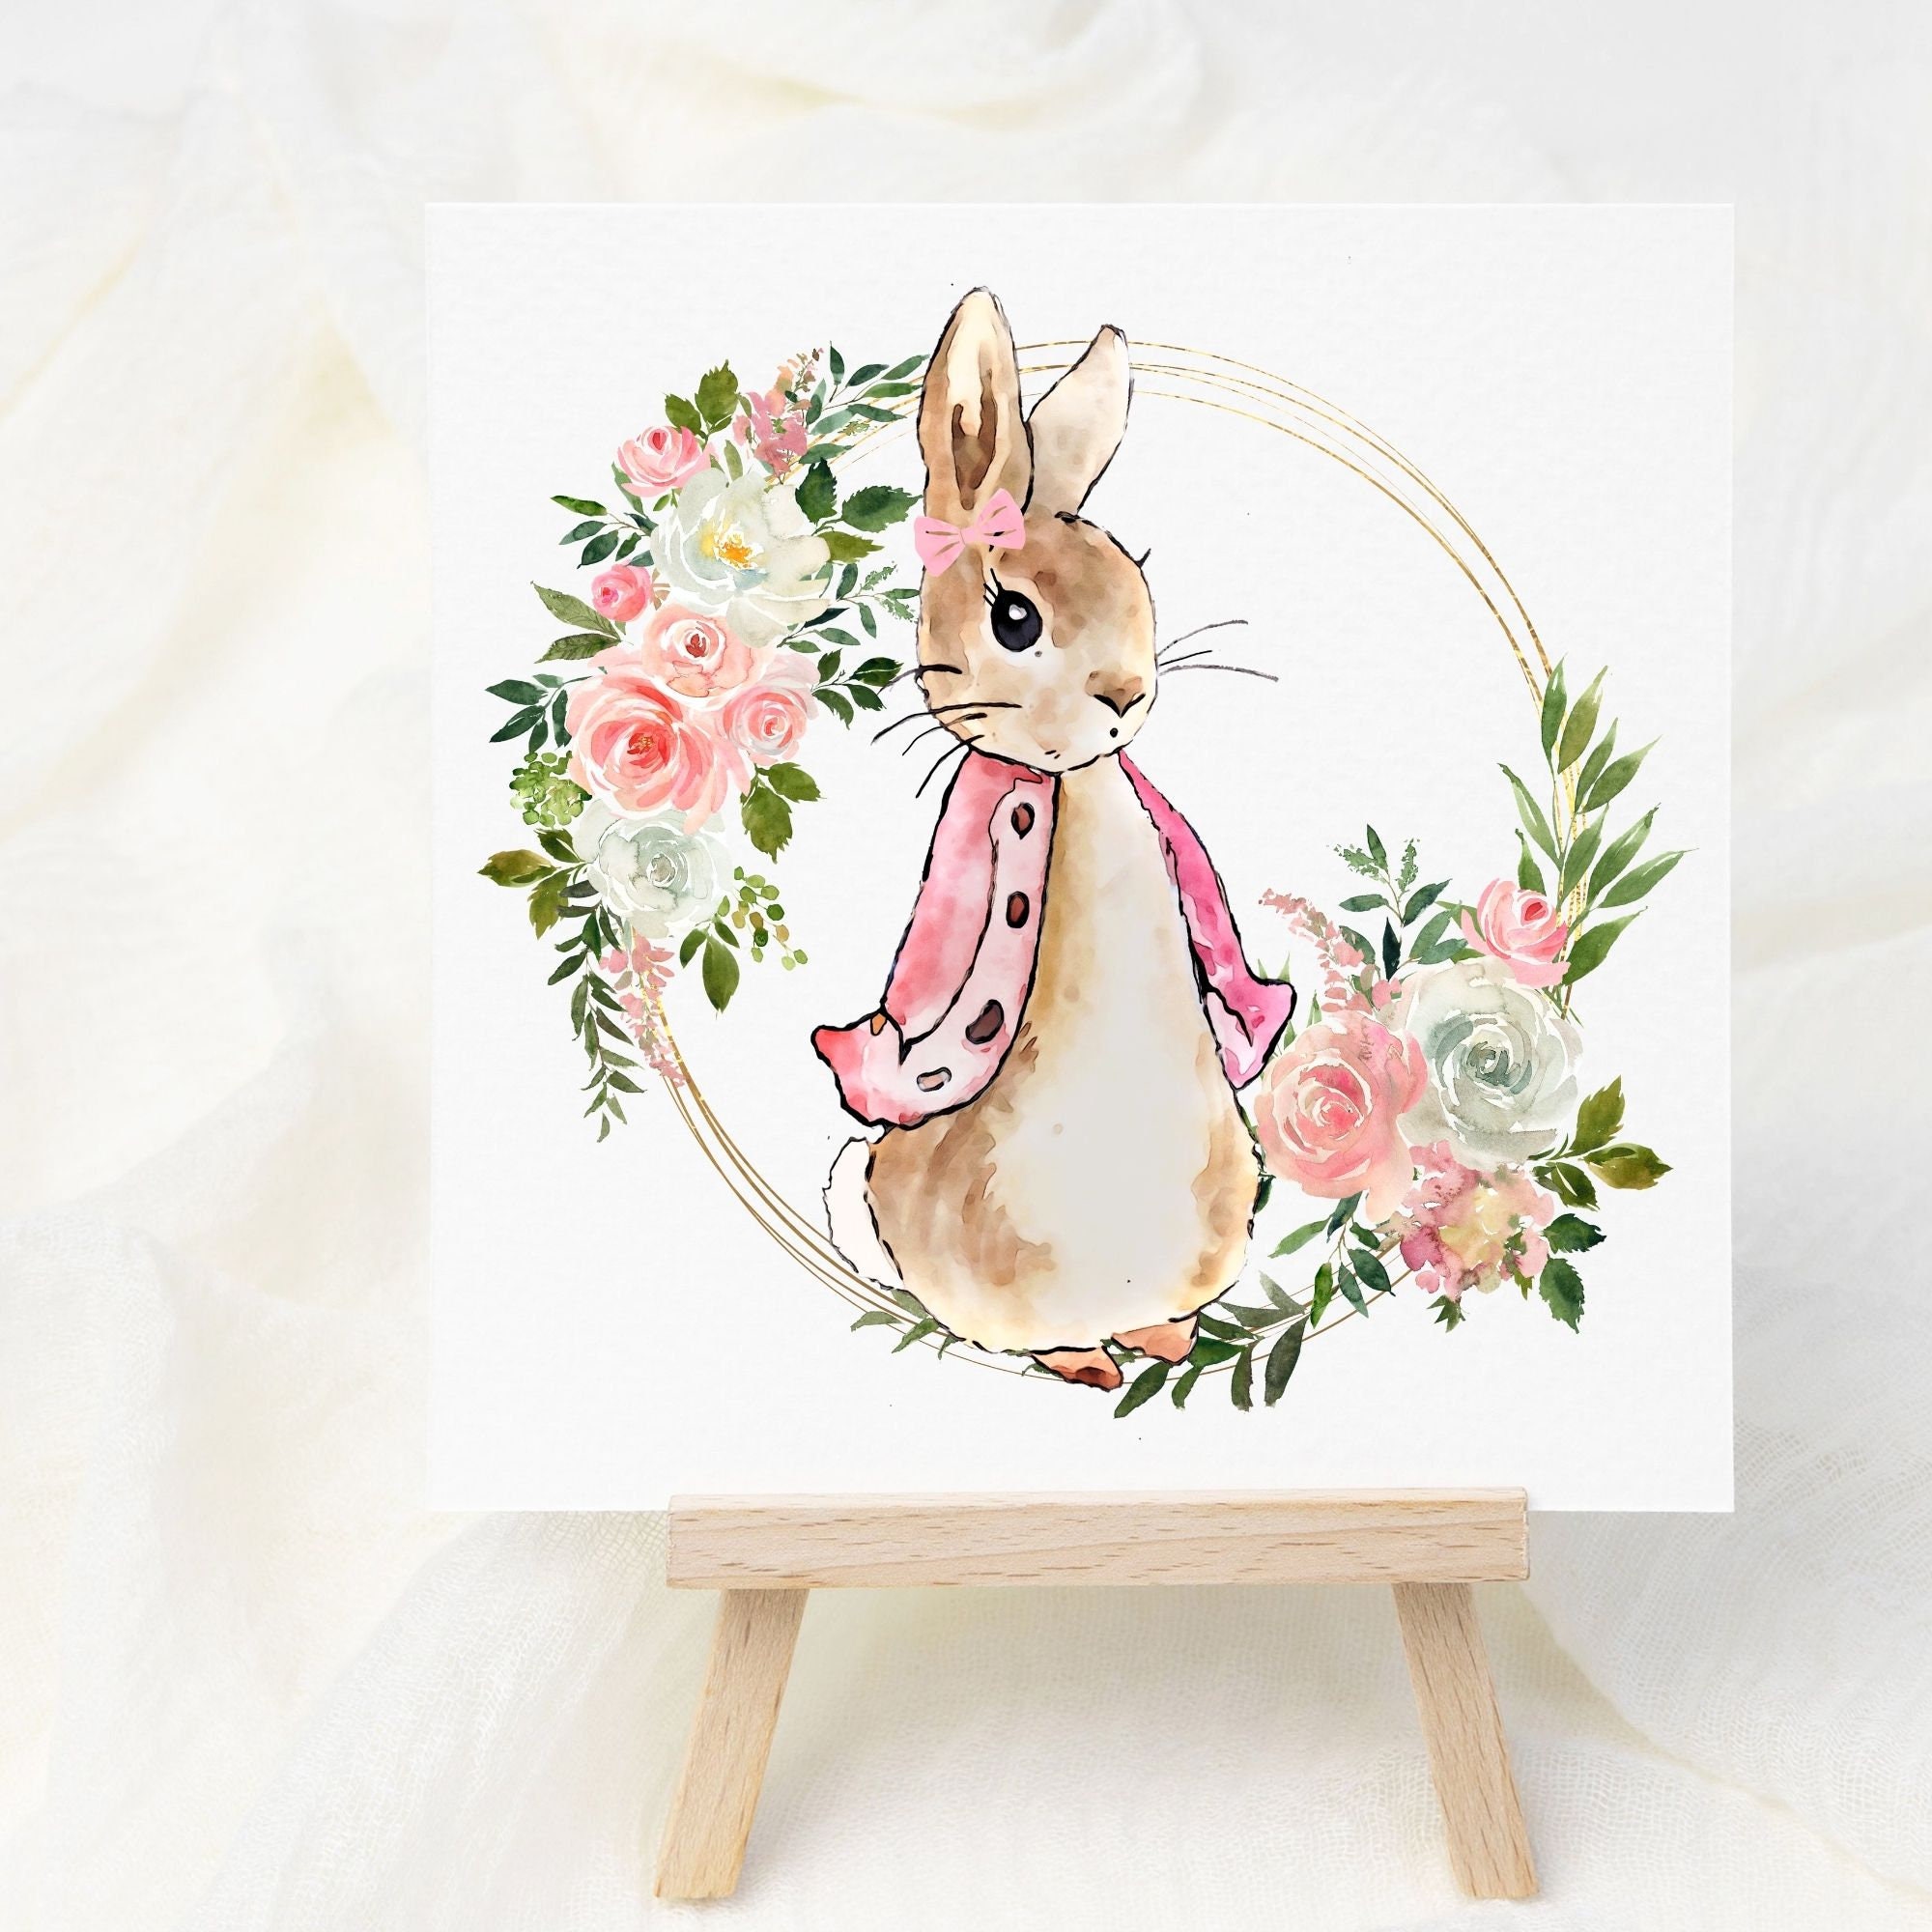 Details about   Flopsy 1st 2nd 3rd 4th 5th Childrens Peter Rabbit Birthday Card/Easel Decor 